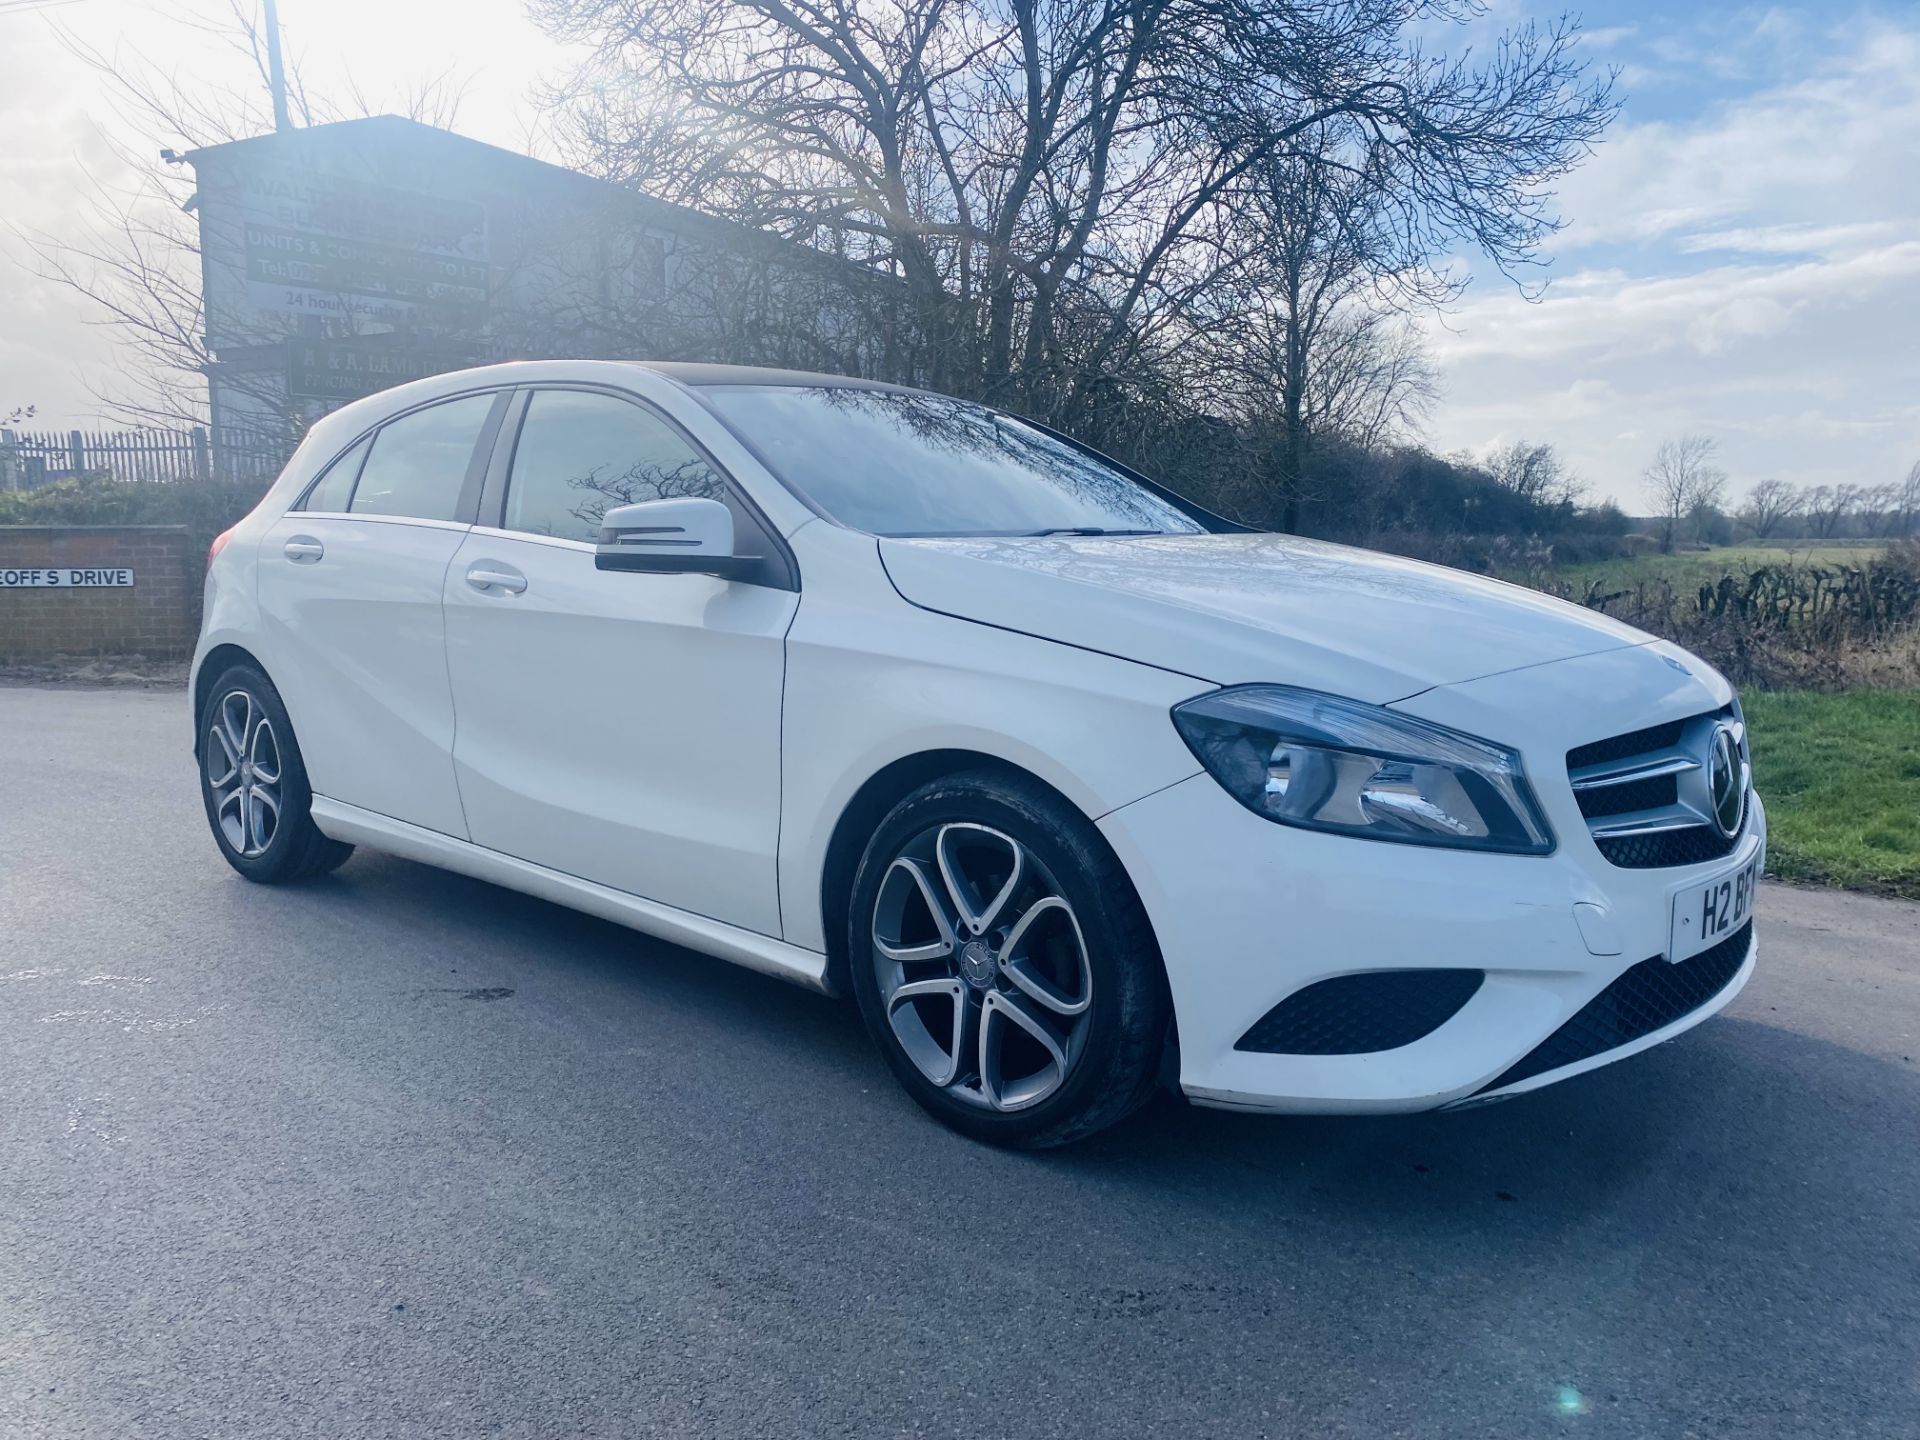 (ON SALE) MERCEDES A180d "SPORT" (13 REG) PRIVATE PLATE INCLUDED - AIR CON - ALLOYS (NO VAT) - Image 2 of 22